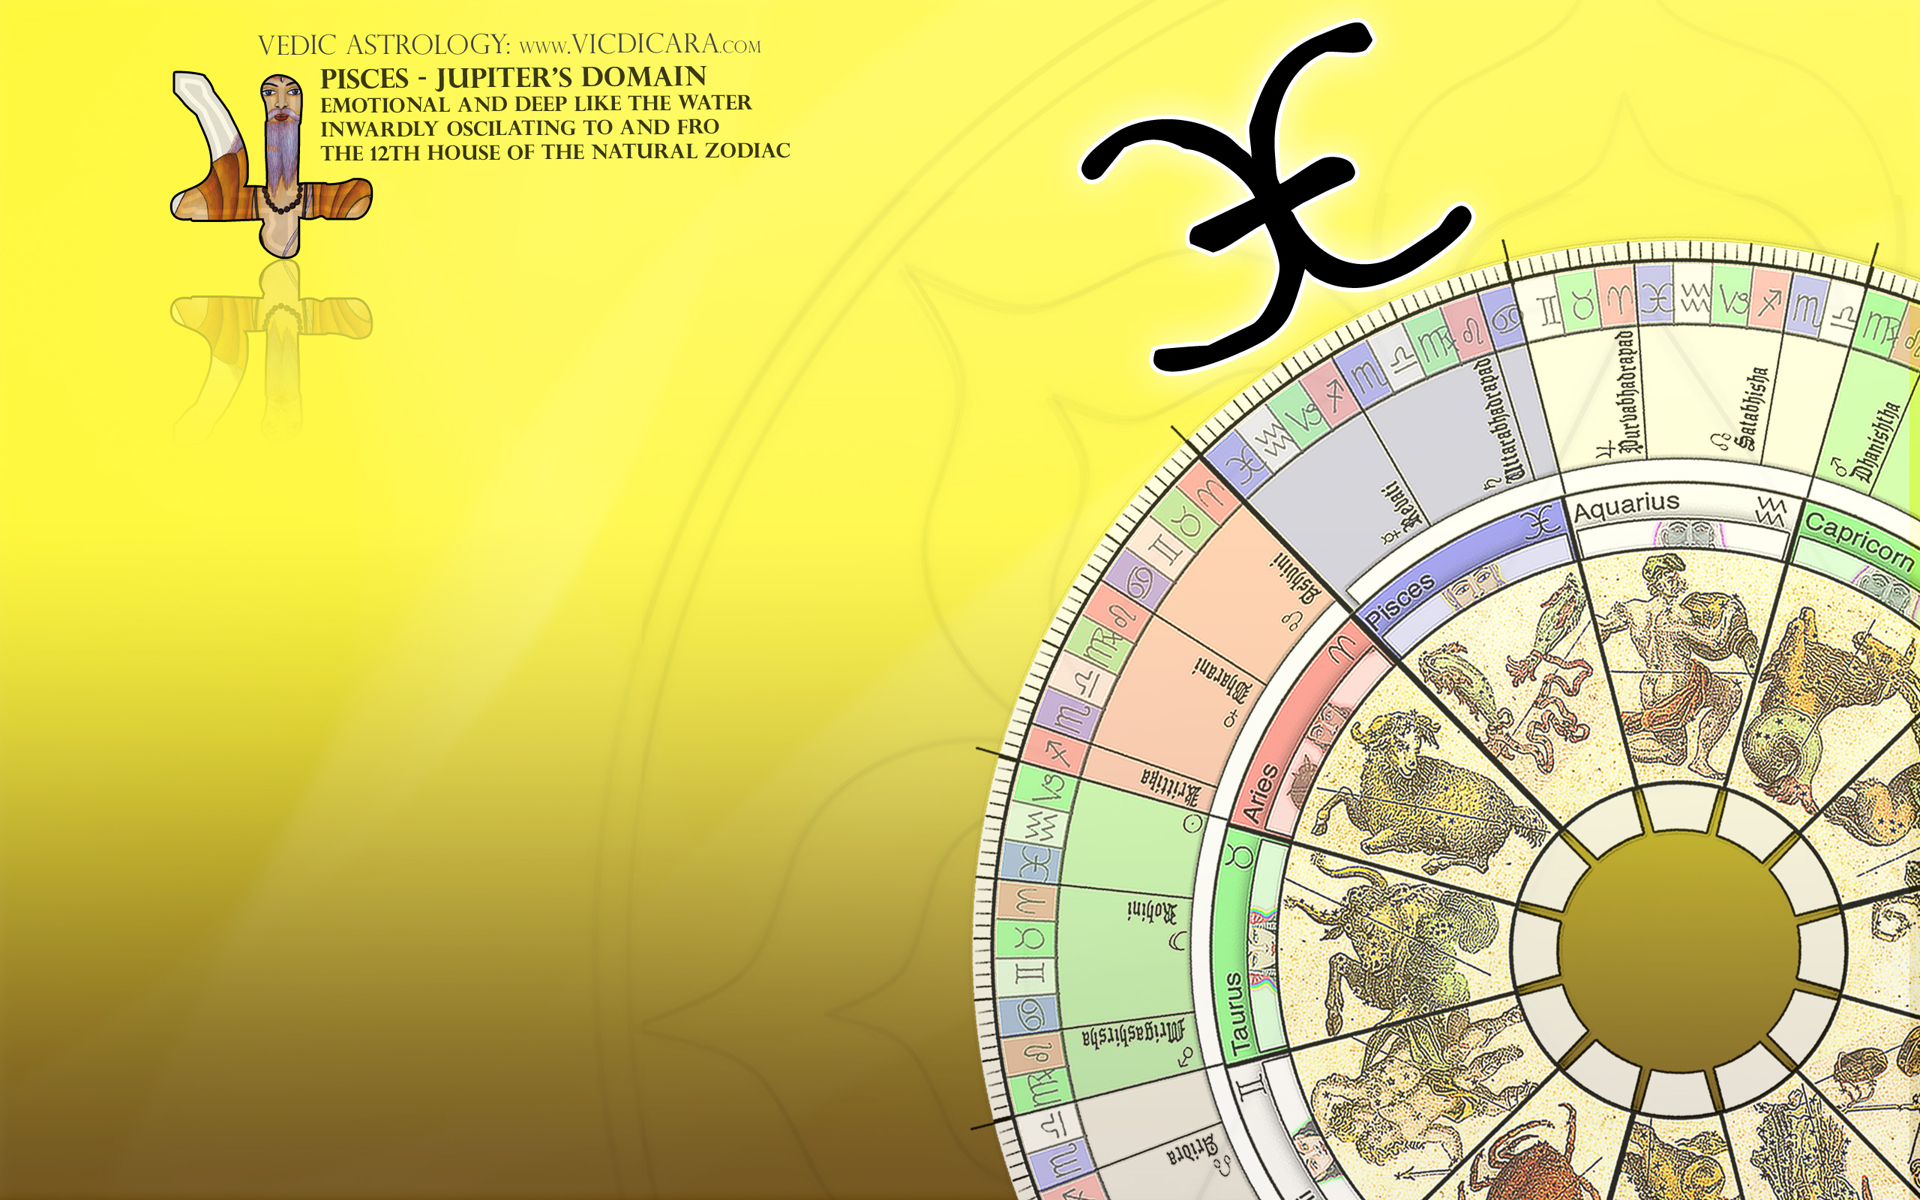 Signs of the zodiac on a yellow background wallpapers and images ...